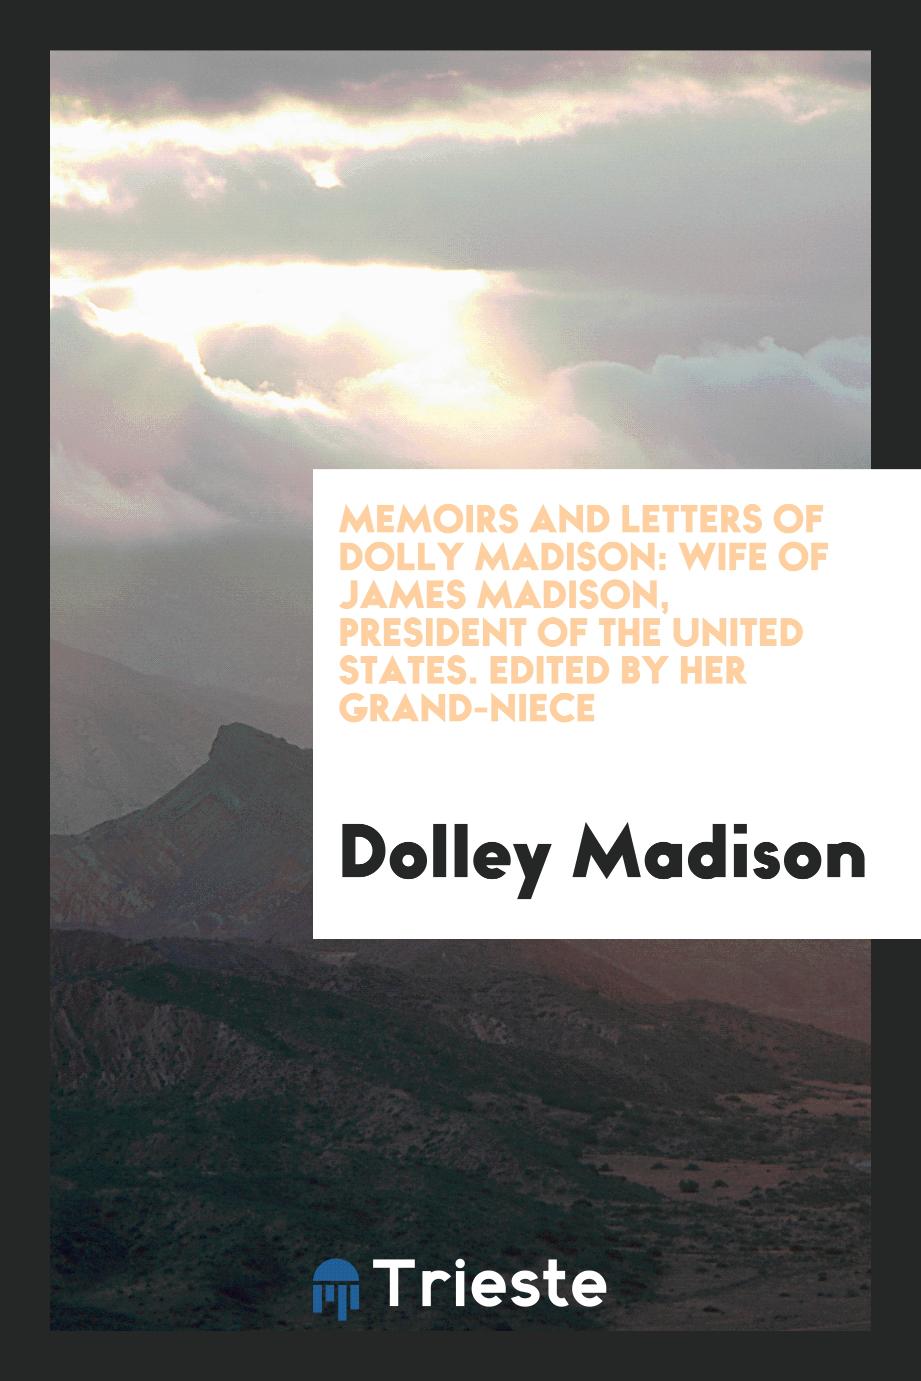 Memoirs and letters of Dolly Madison: wife of James Madison, president of the United States. Edited by her grand-niece